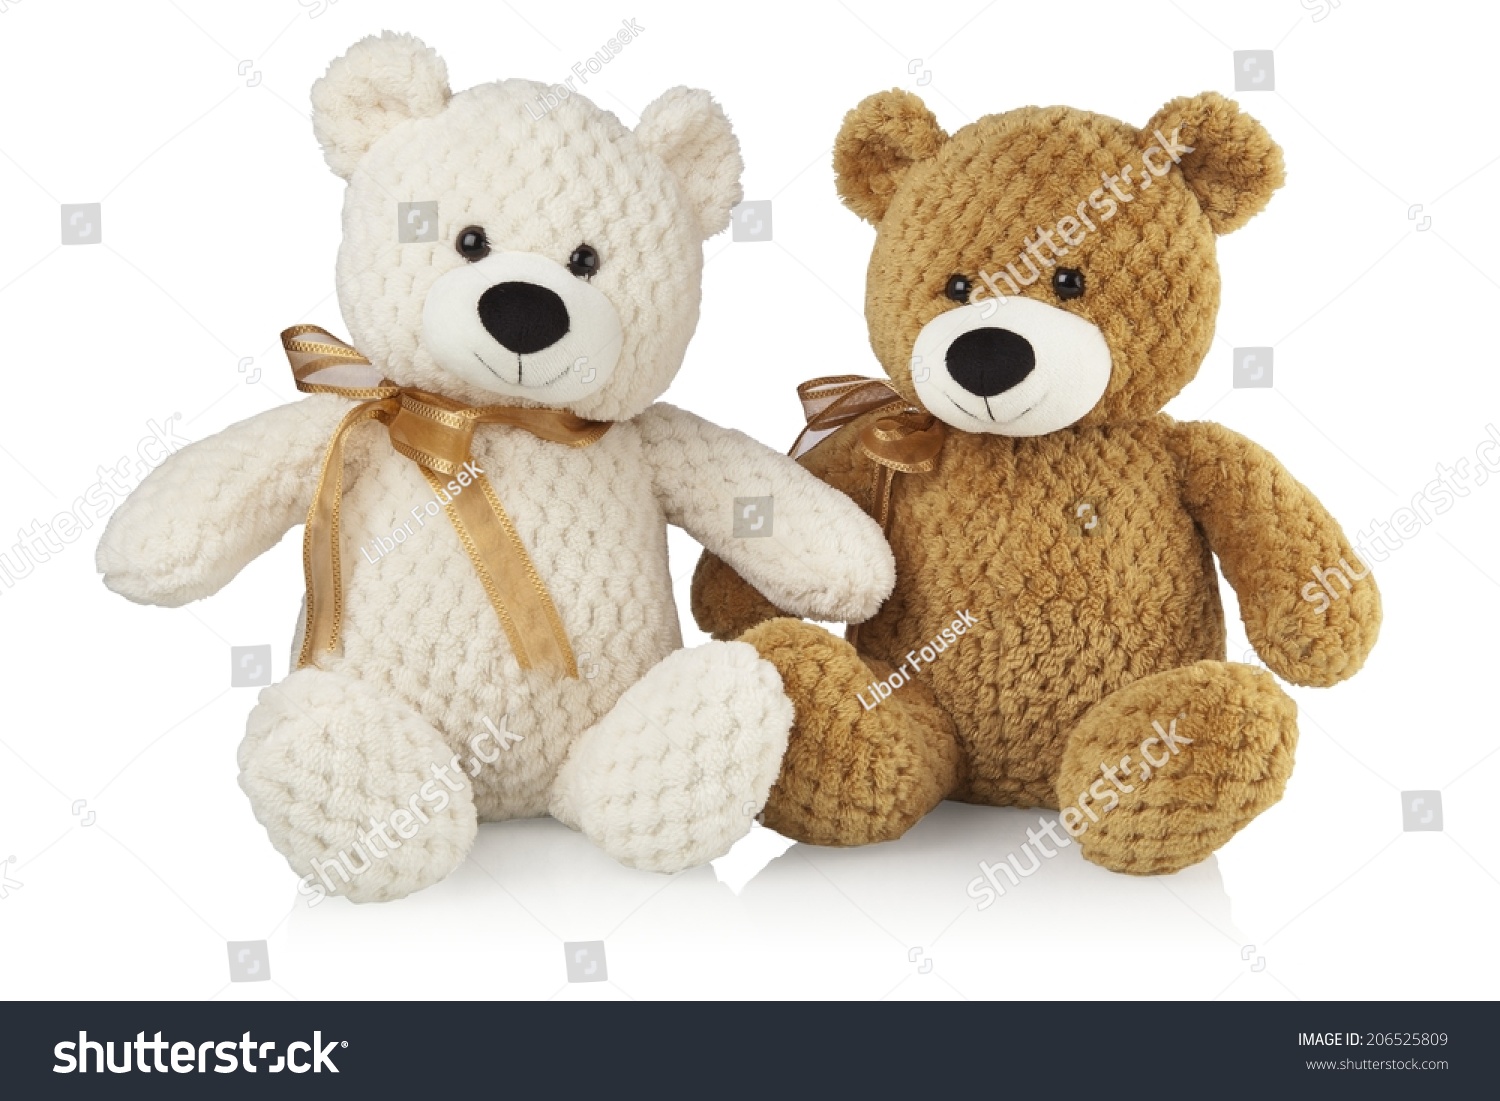 white and brown teddy